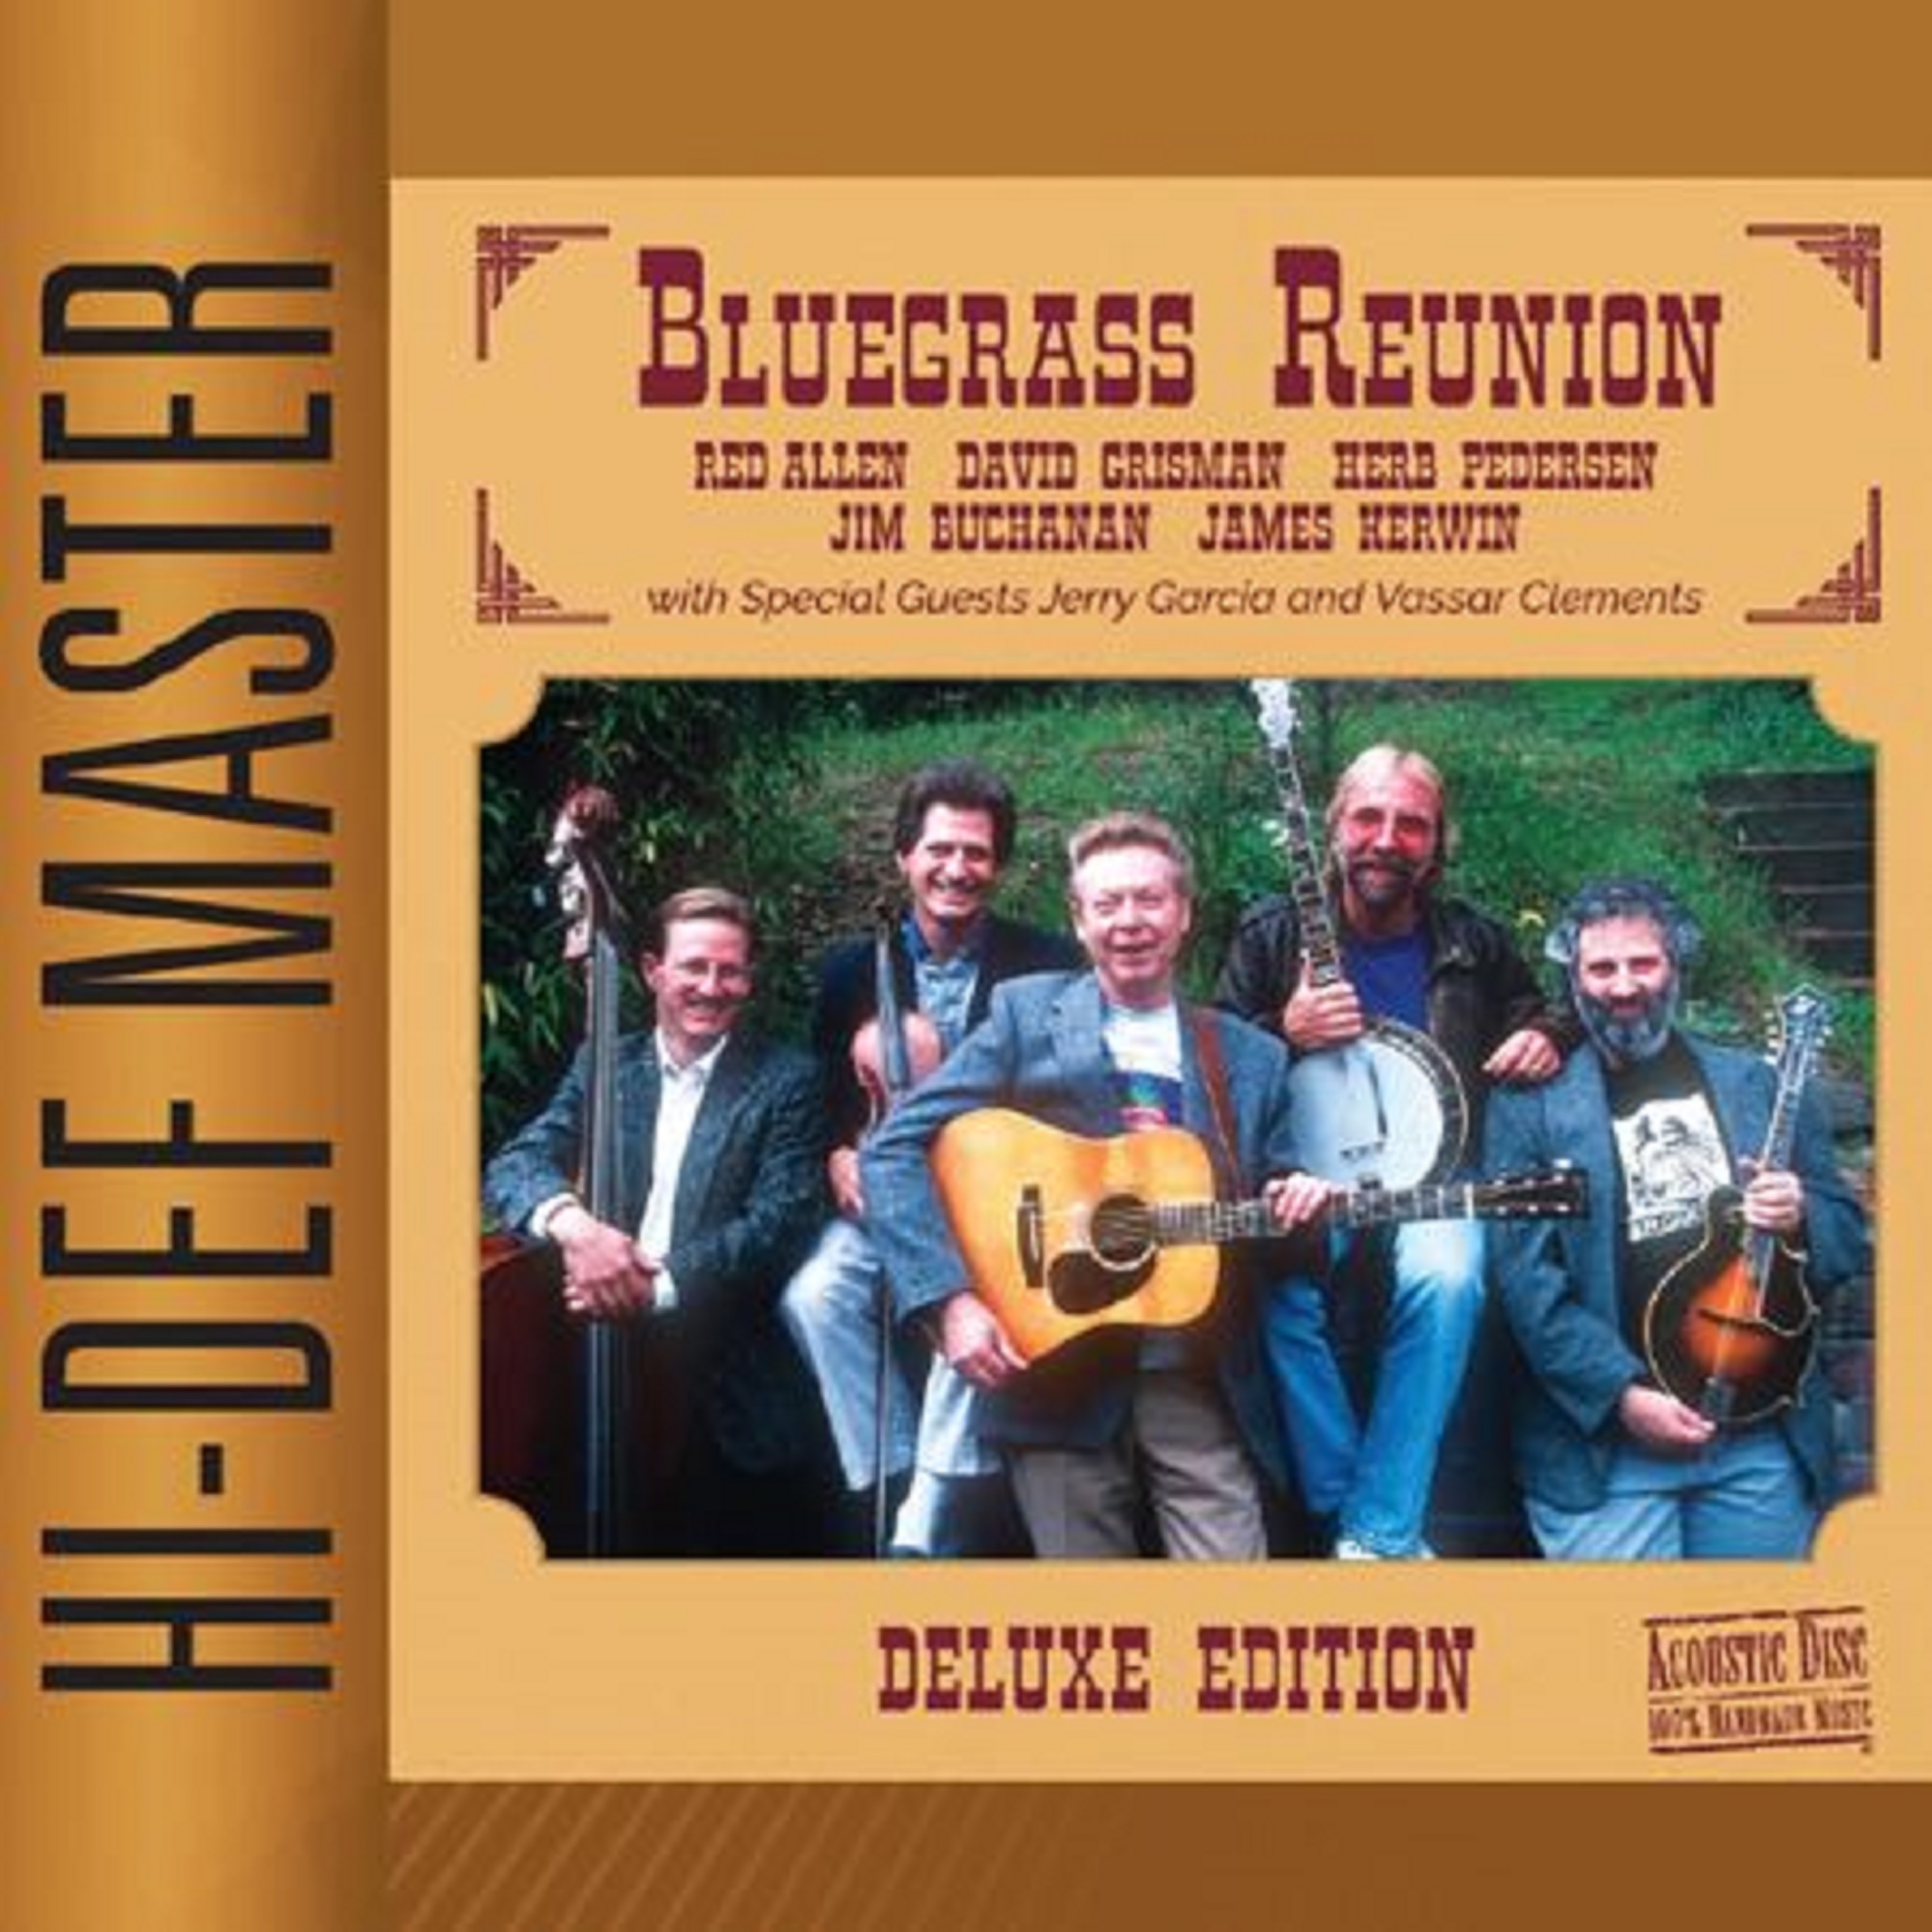 Bluegrass Reunion Deluxe Edition: An Unmissable Revival of Classic Bluegrass